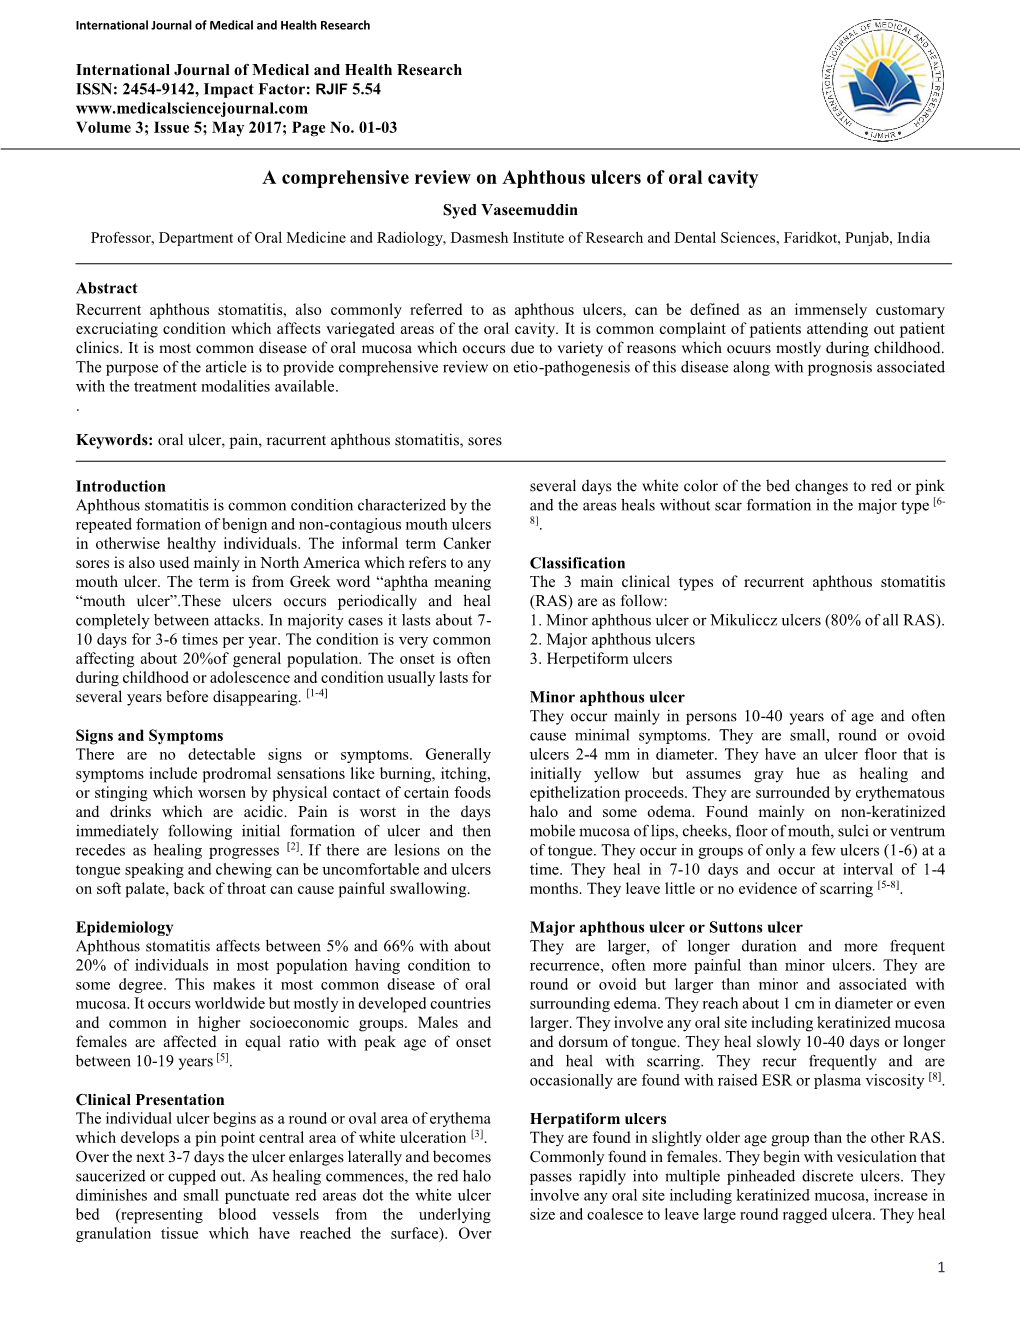 A Comprehensive Review on Aphthous Ulcers of Oral Cavity